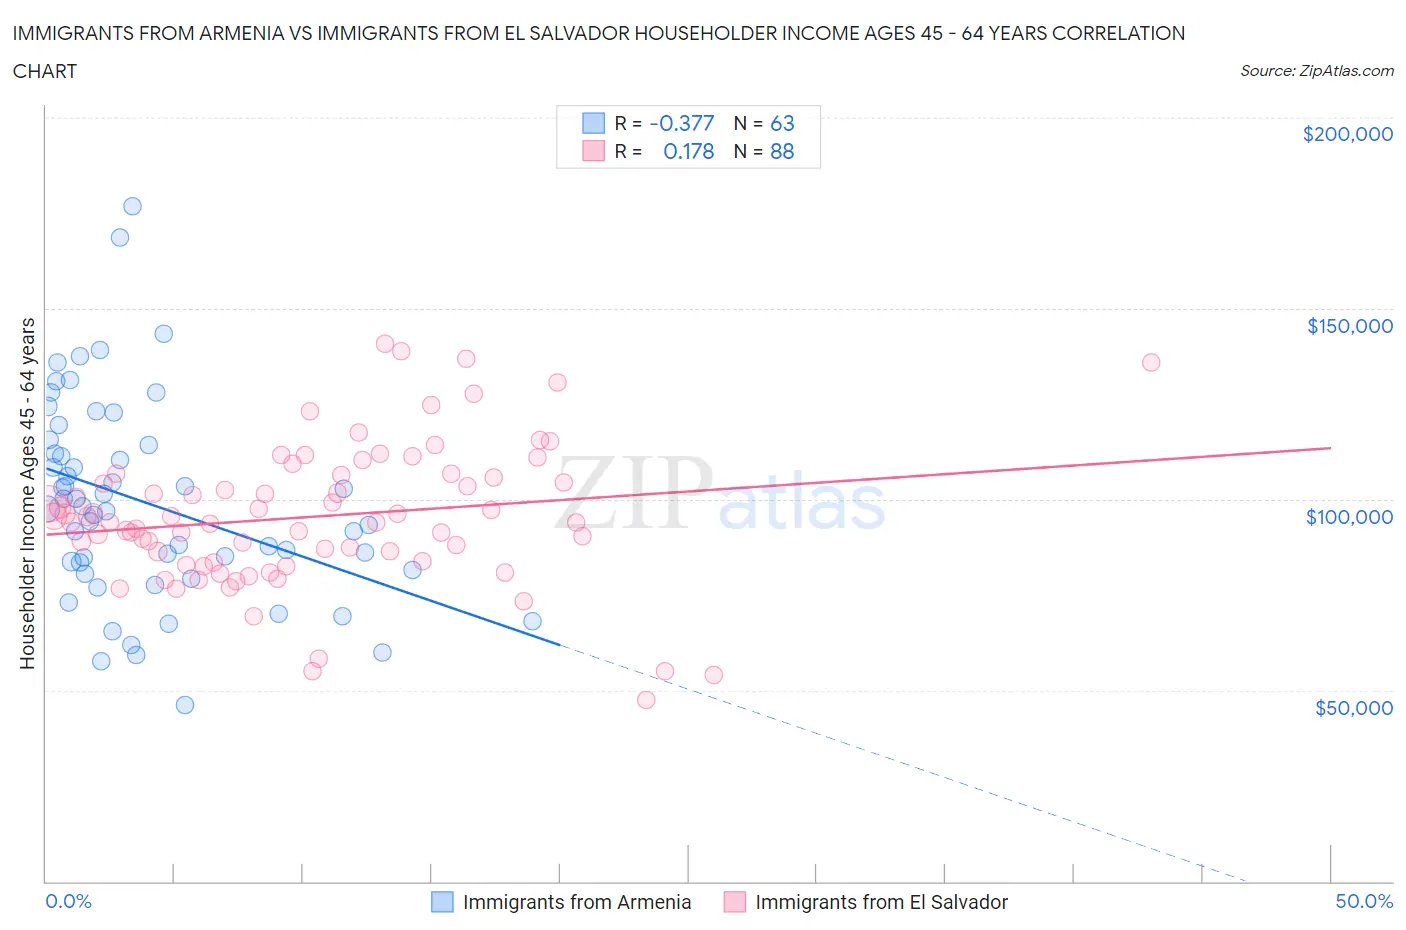 Immigrants from Armenia vs Immigrants from El Salvador Householder Income Ages 45 - 64 years